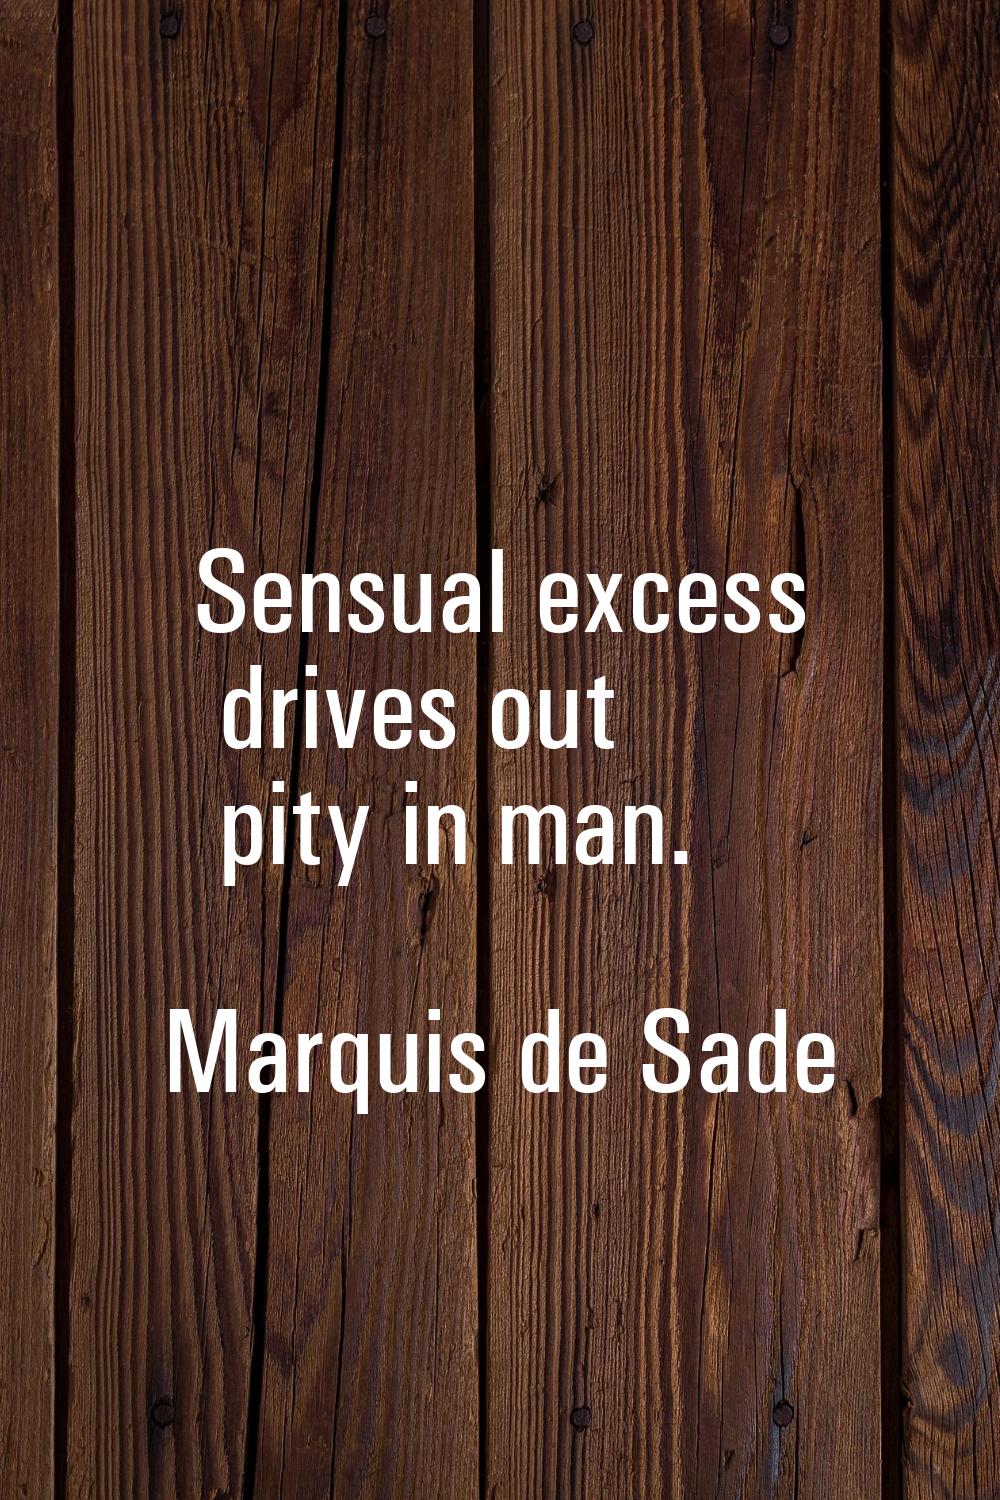 Sensual excess drives out pity in man.